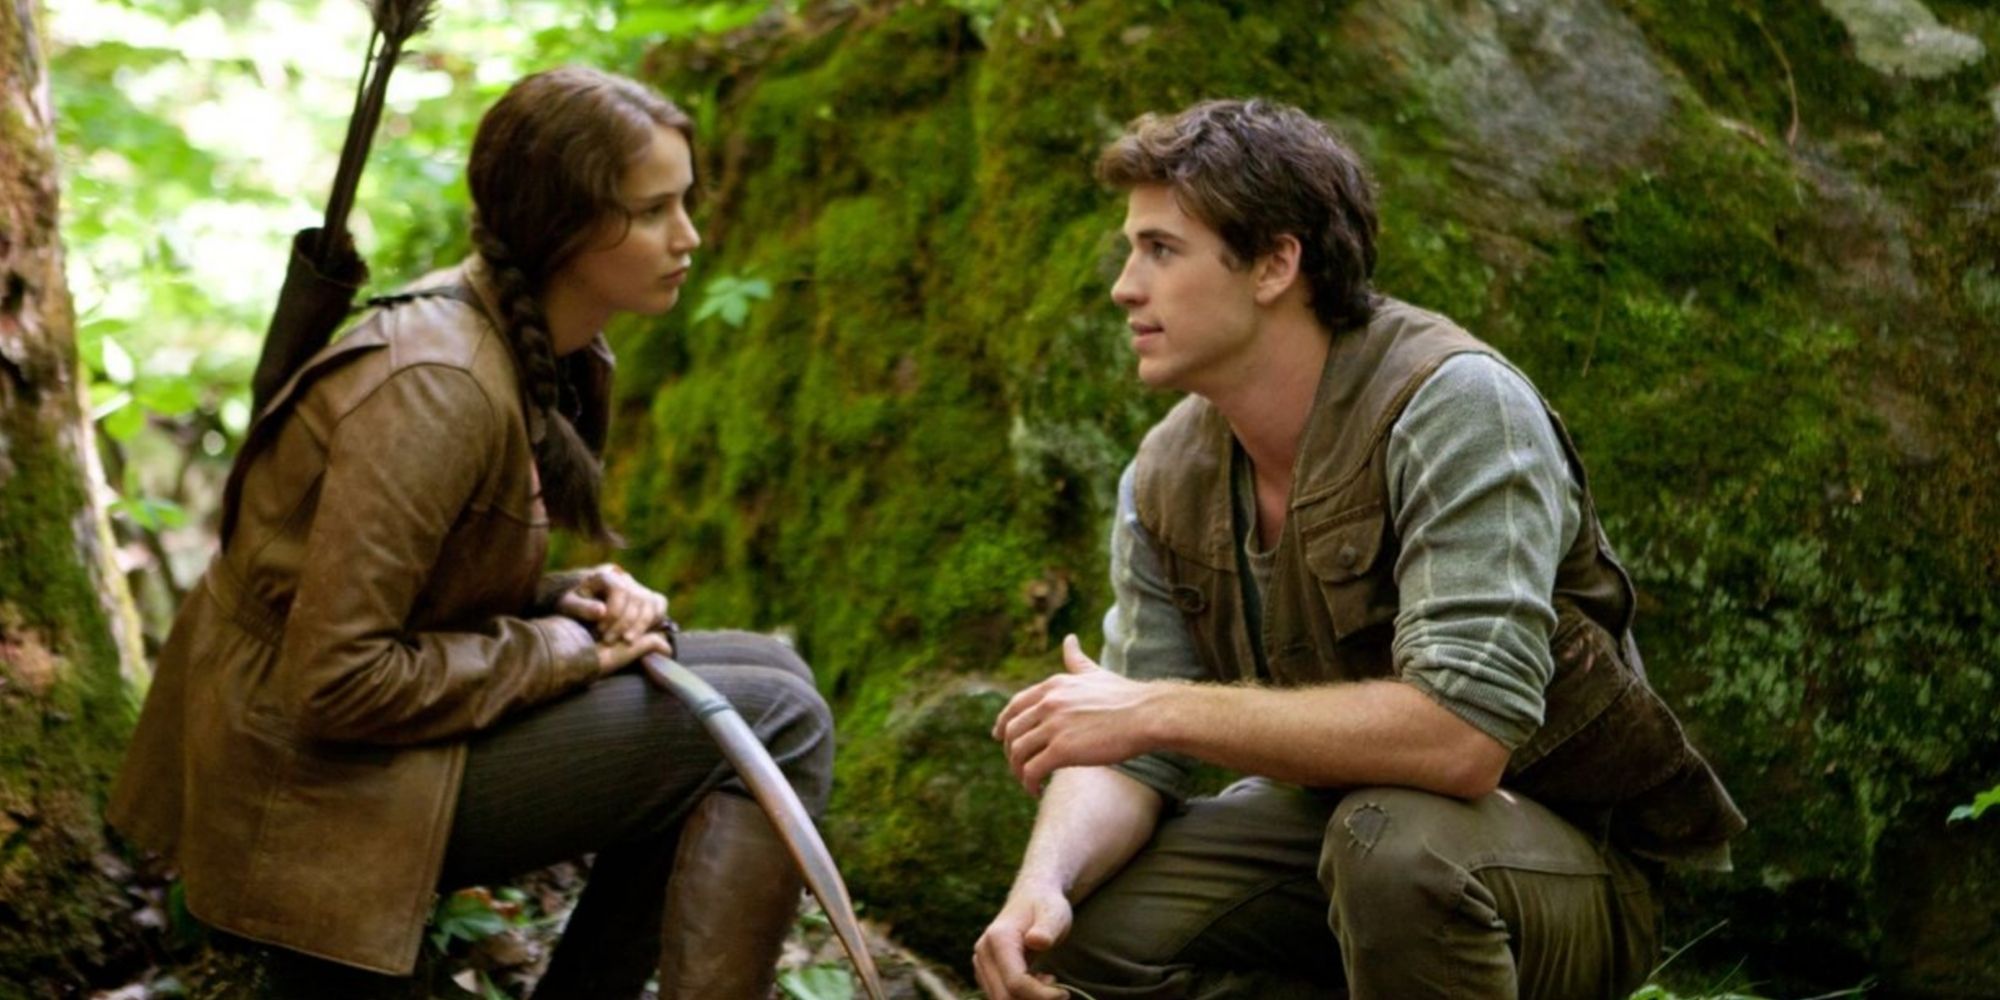 Katniss and Gale in the forest in The Hunger Games